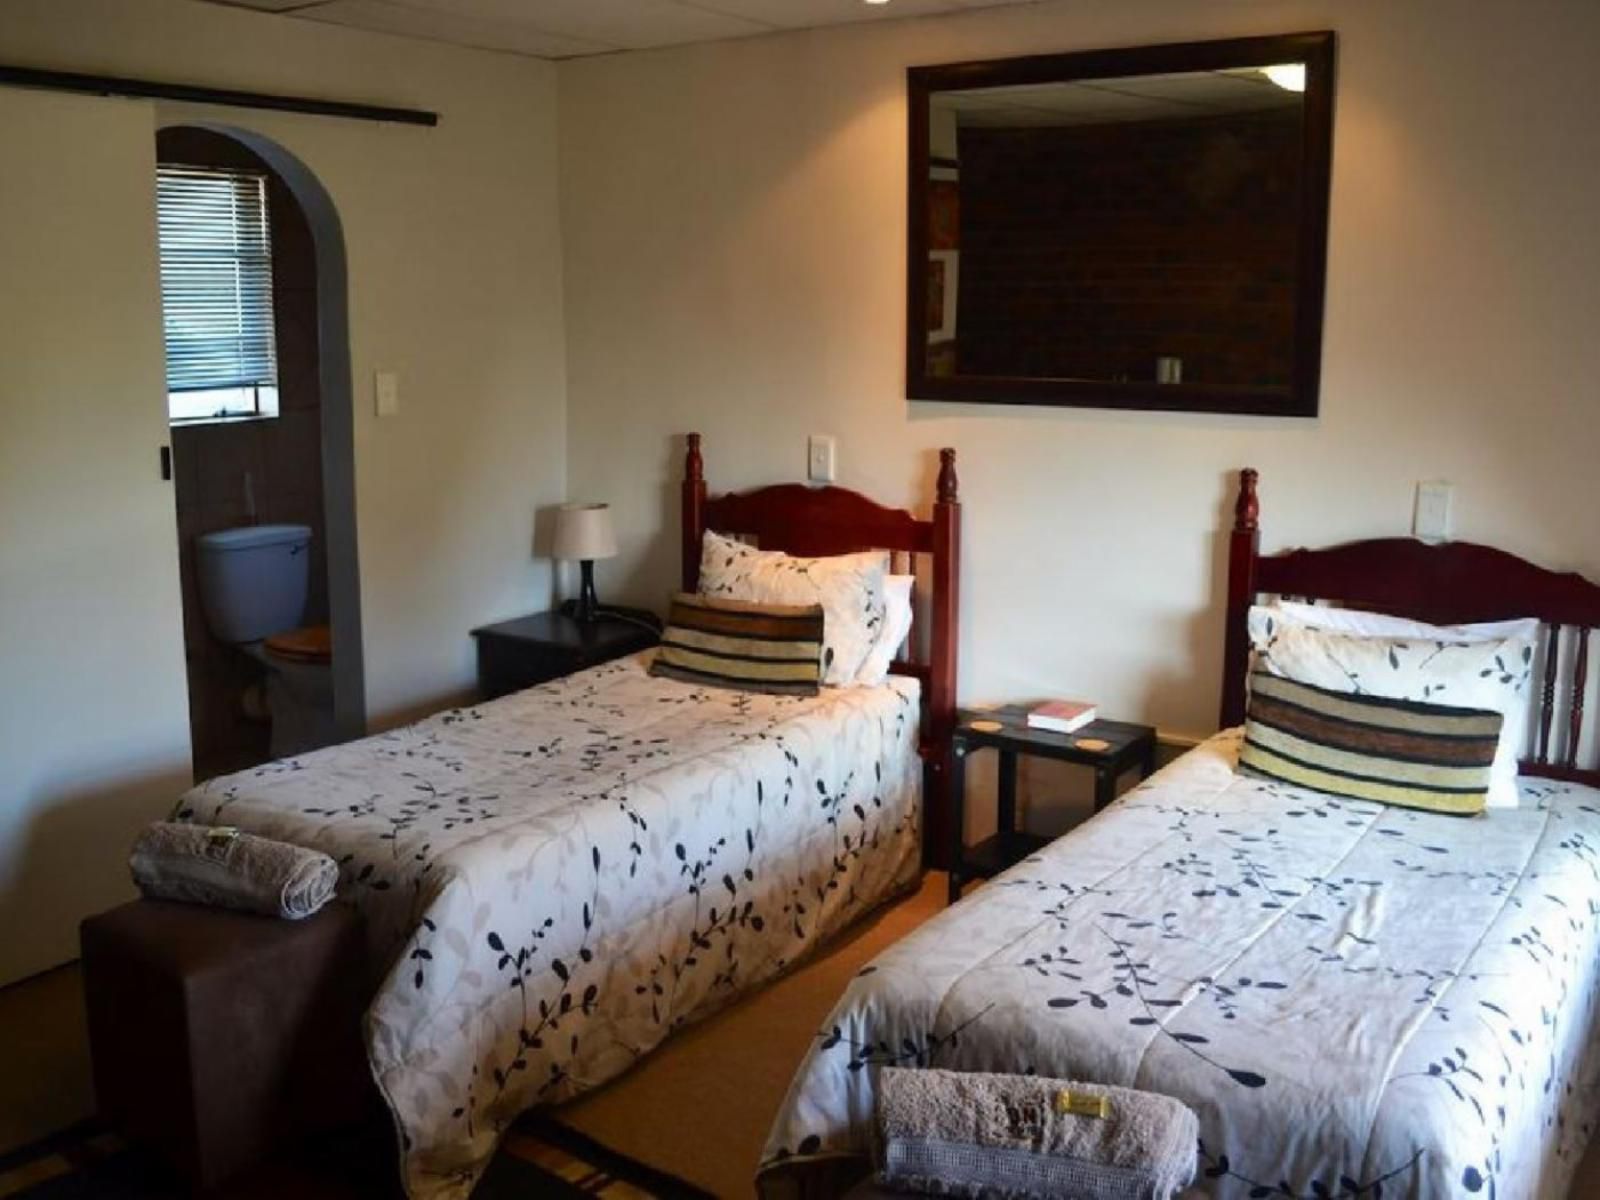 The Venue And Guest Rooms On Site Potchefstroom North West Province South Africa 